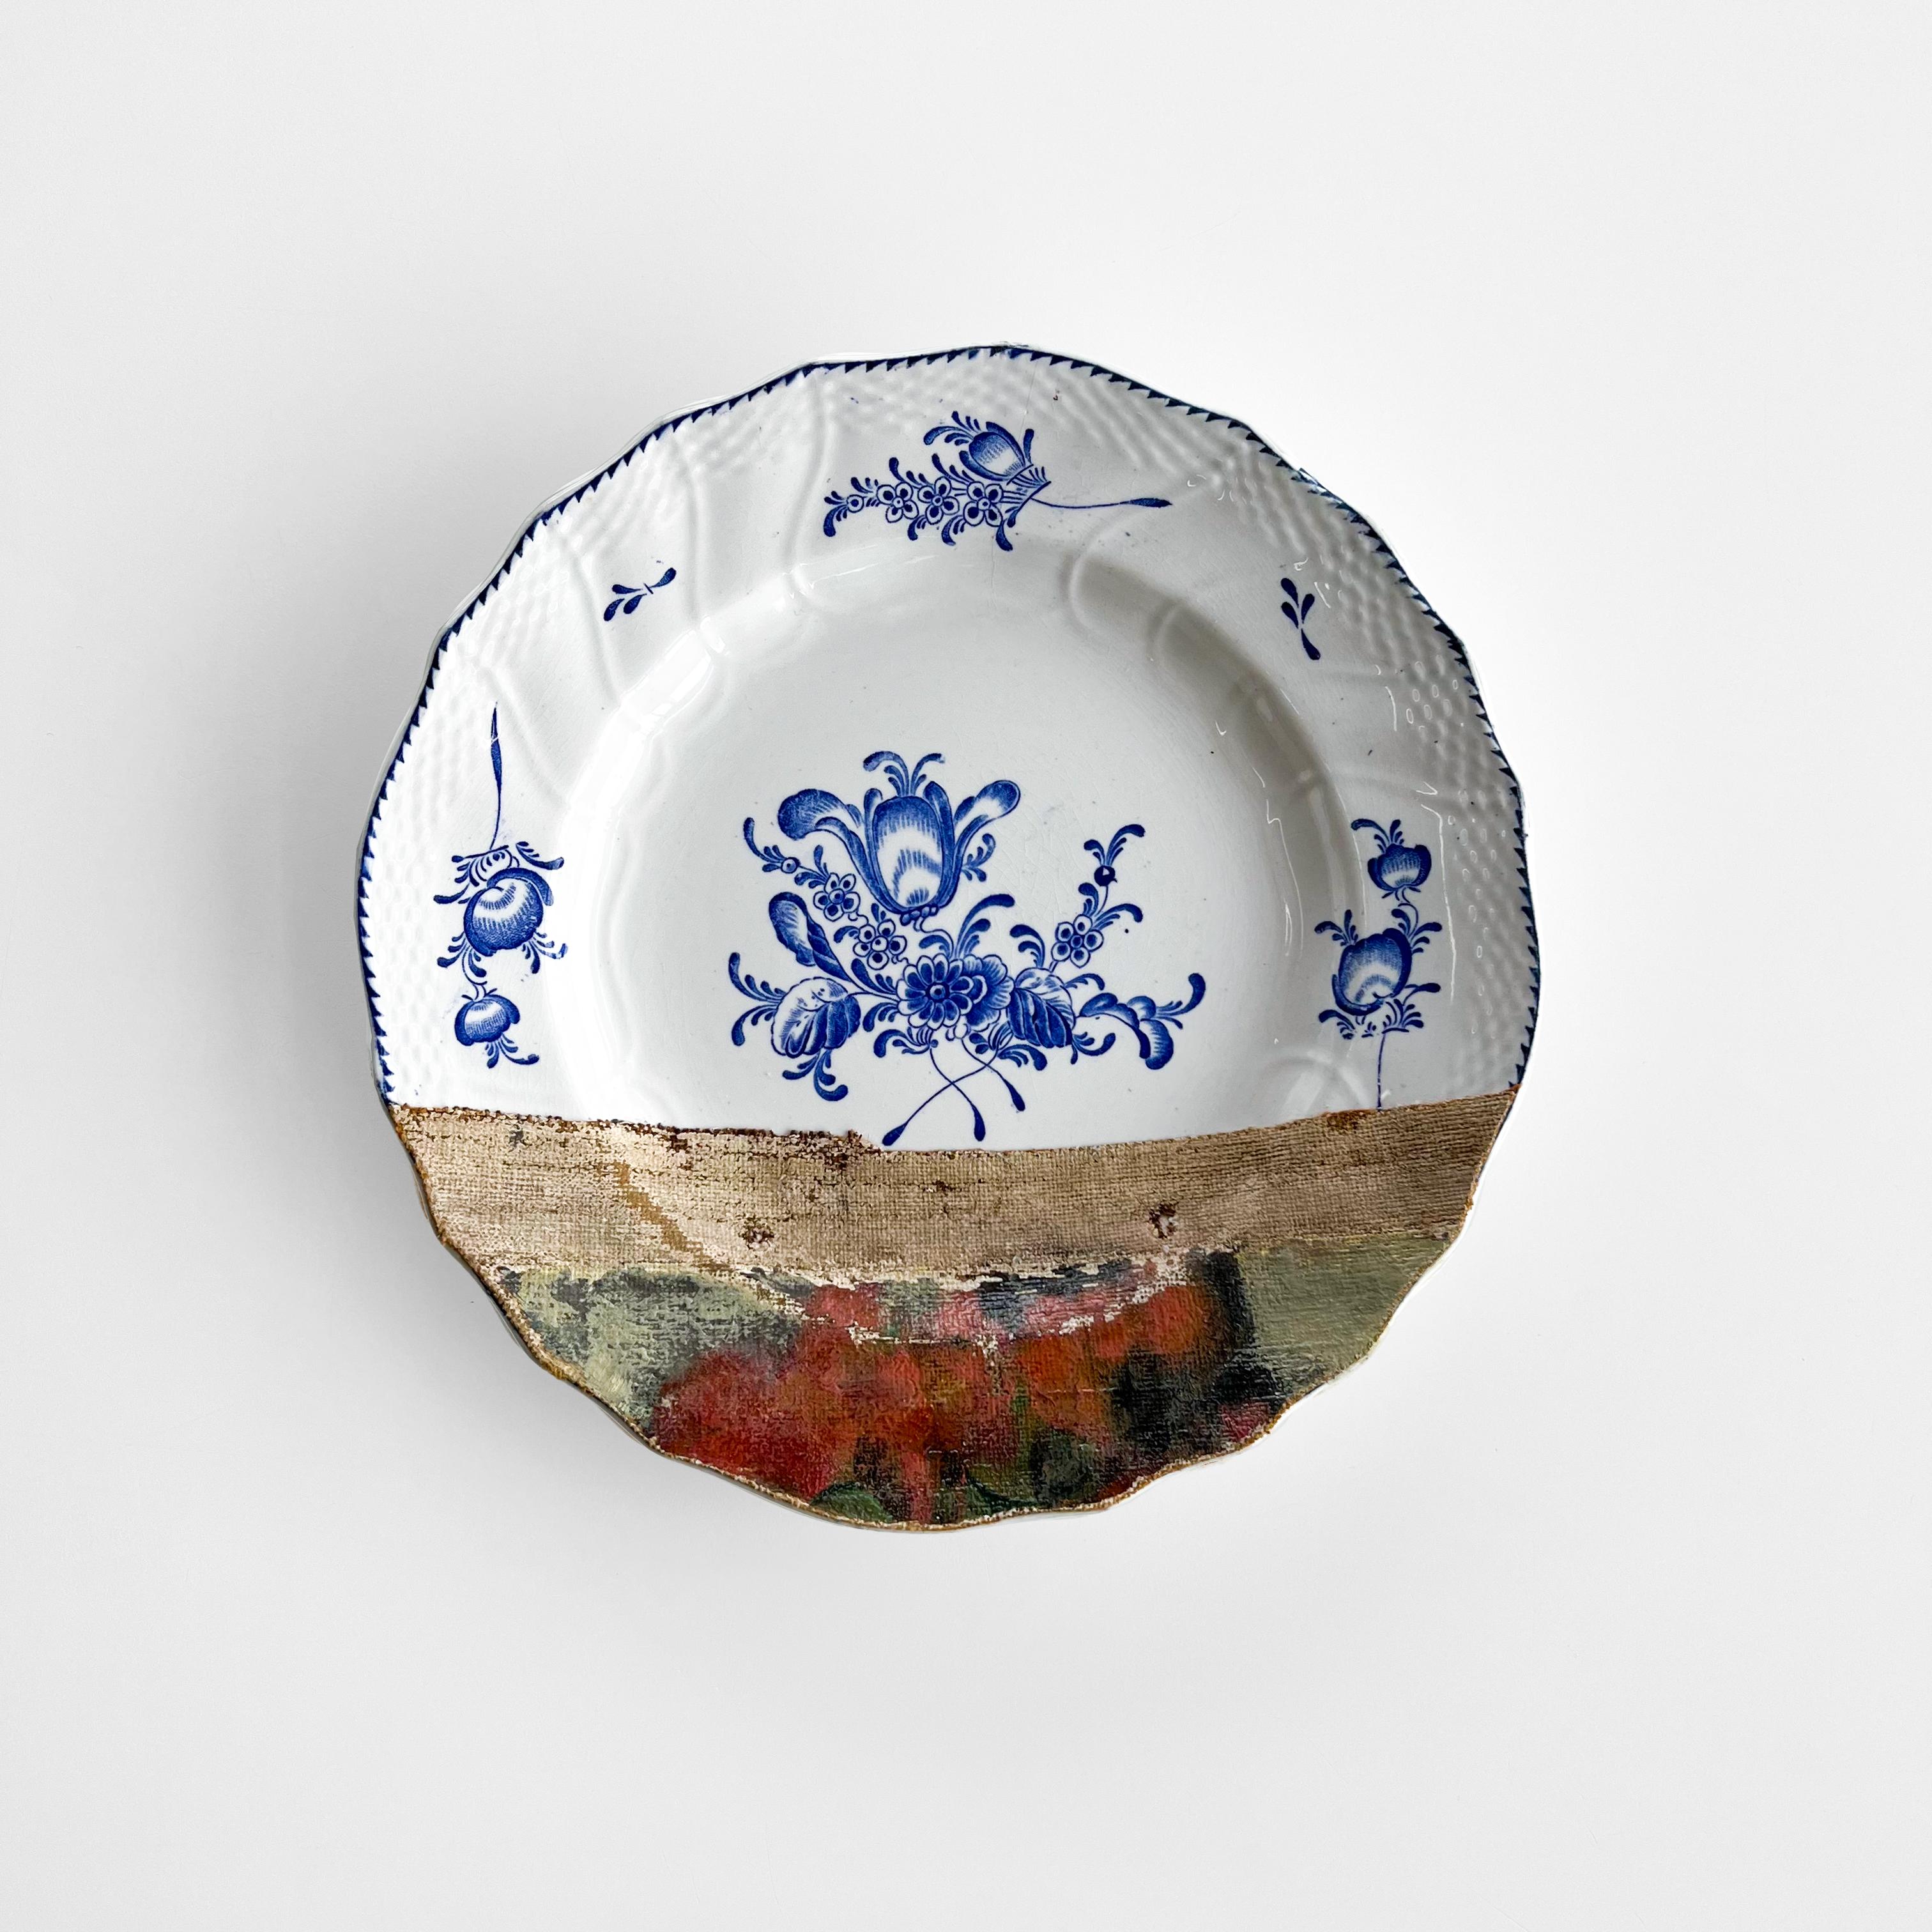 “Red Begonias” belongs to our “Altered Perspectives” series: assemblages of ceramic plates layered with a painting on canvas.
This artwork includes 3 European Blue & White plates from the 19th C. and 20th C.
The painting features a pot of red